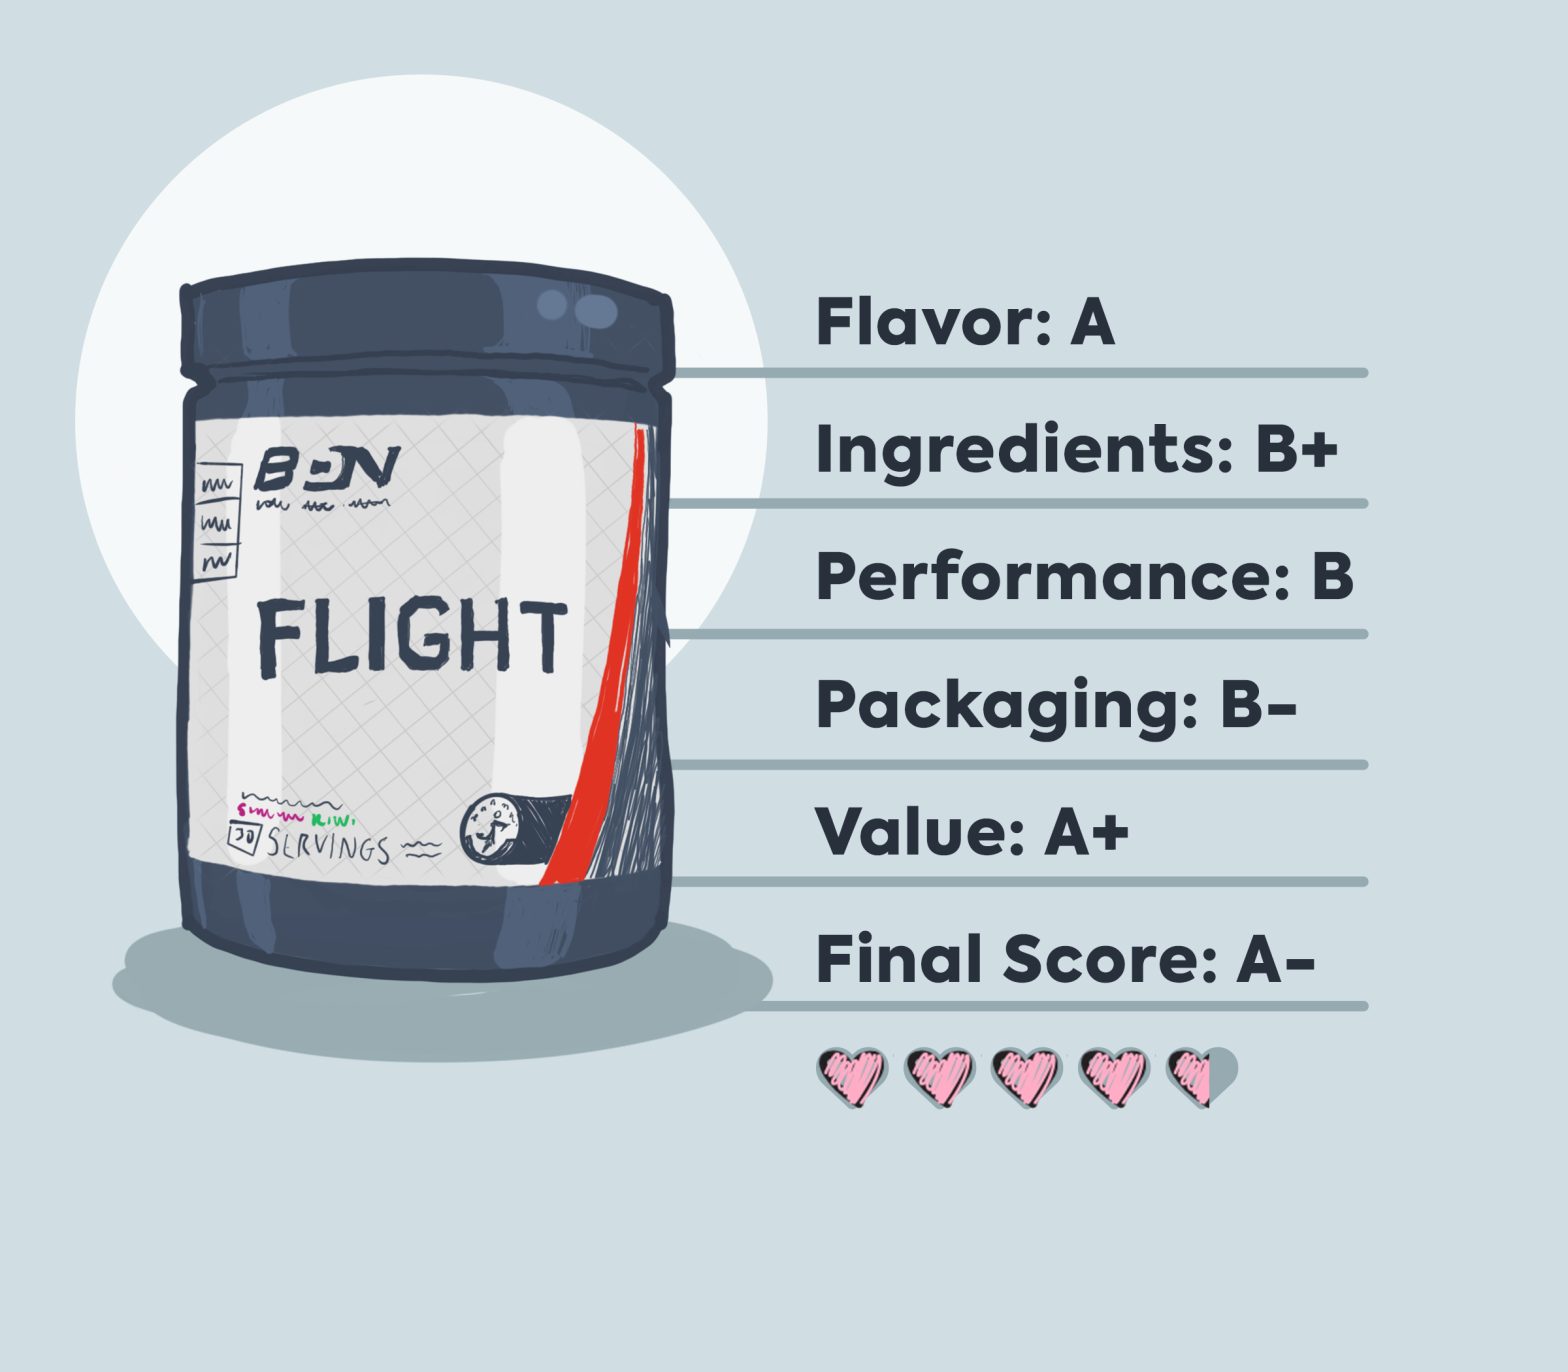 BPN Flight pre workout illustration with review and score information on light blue background